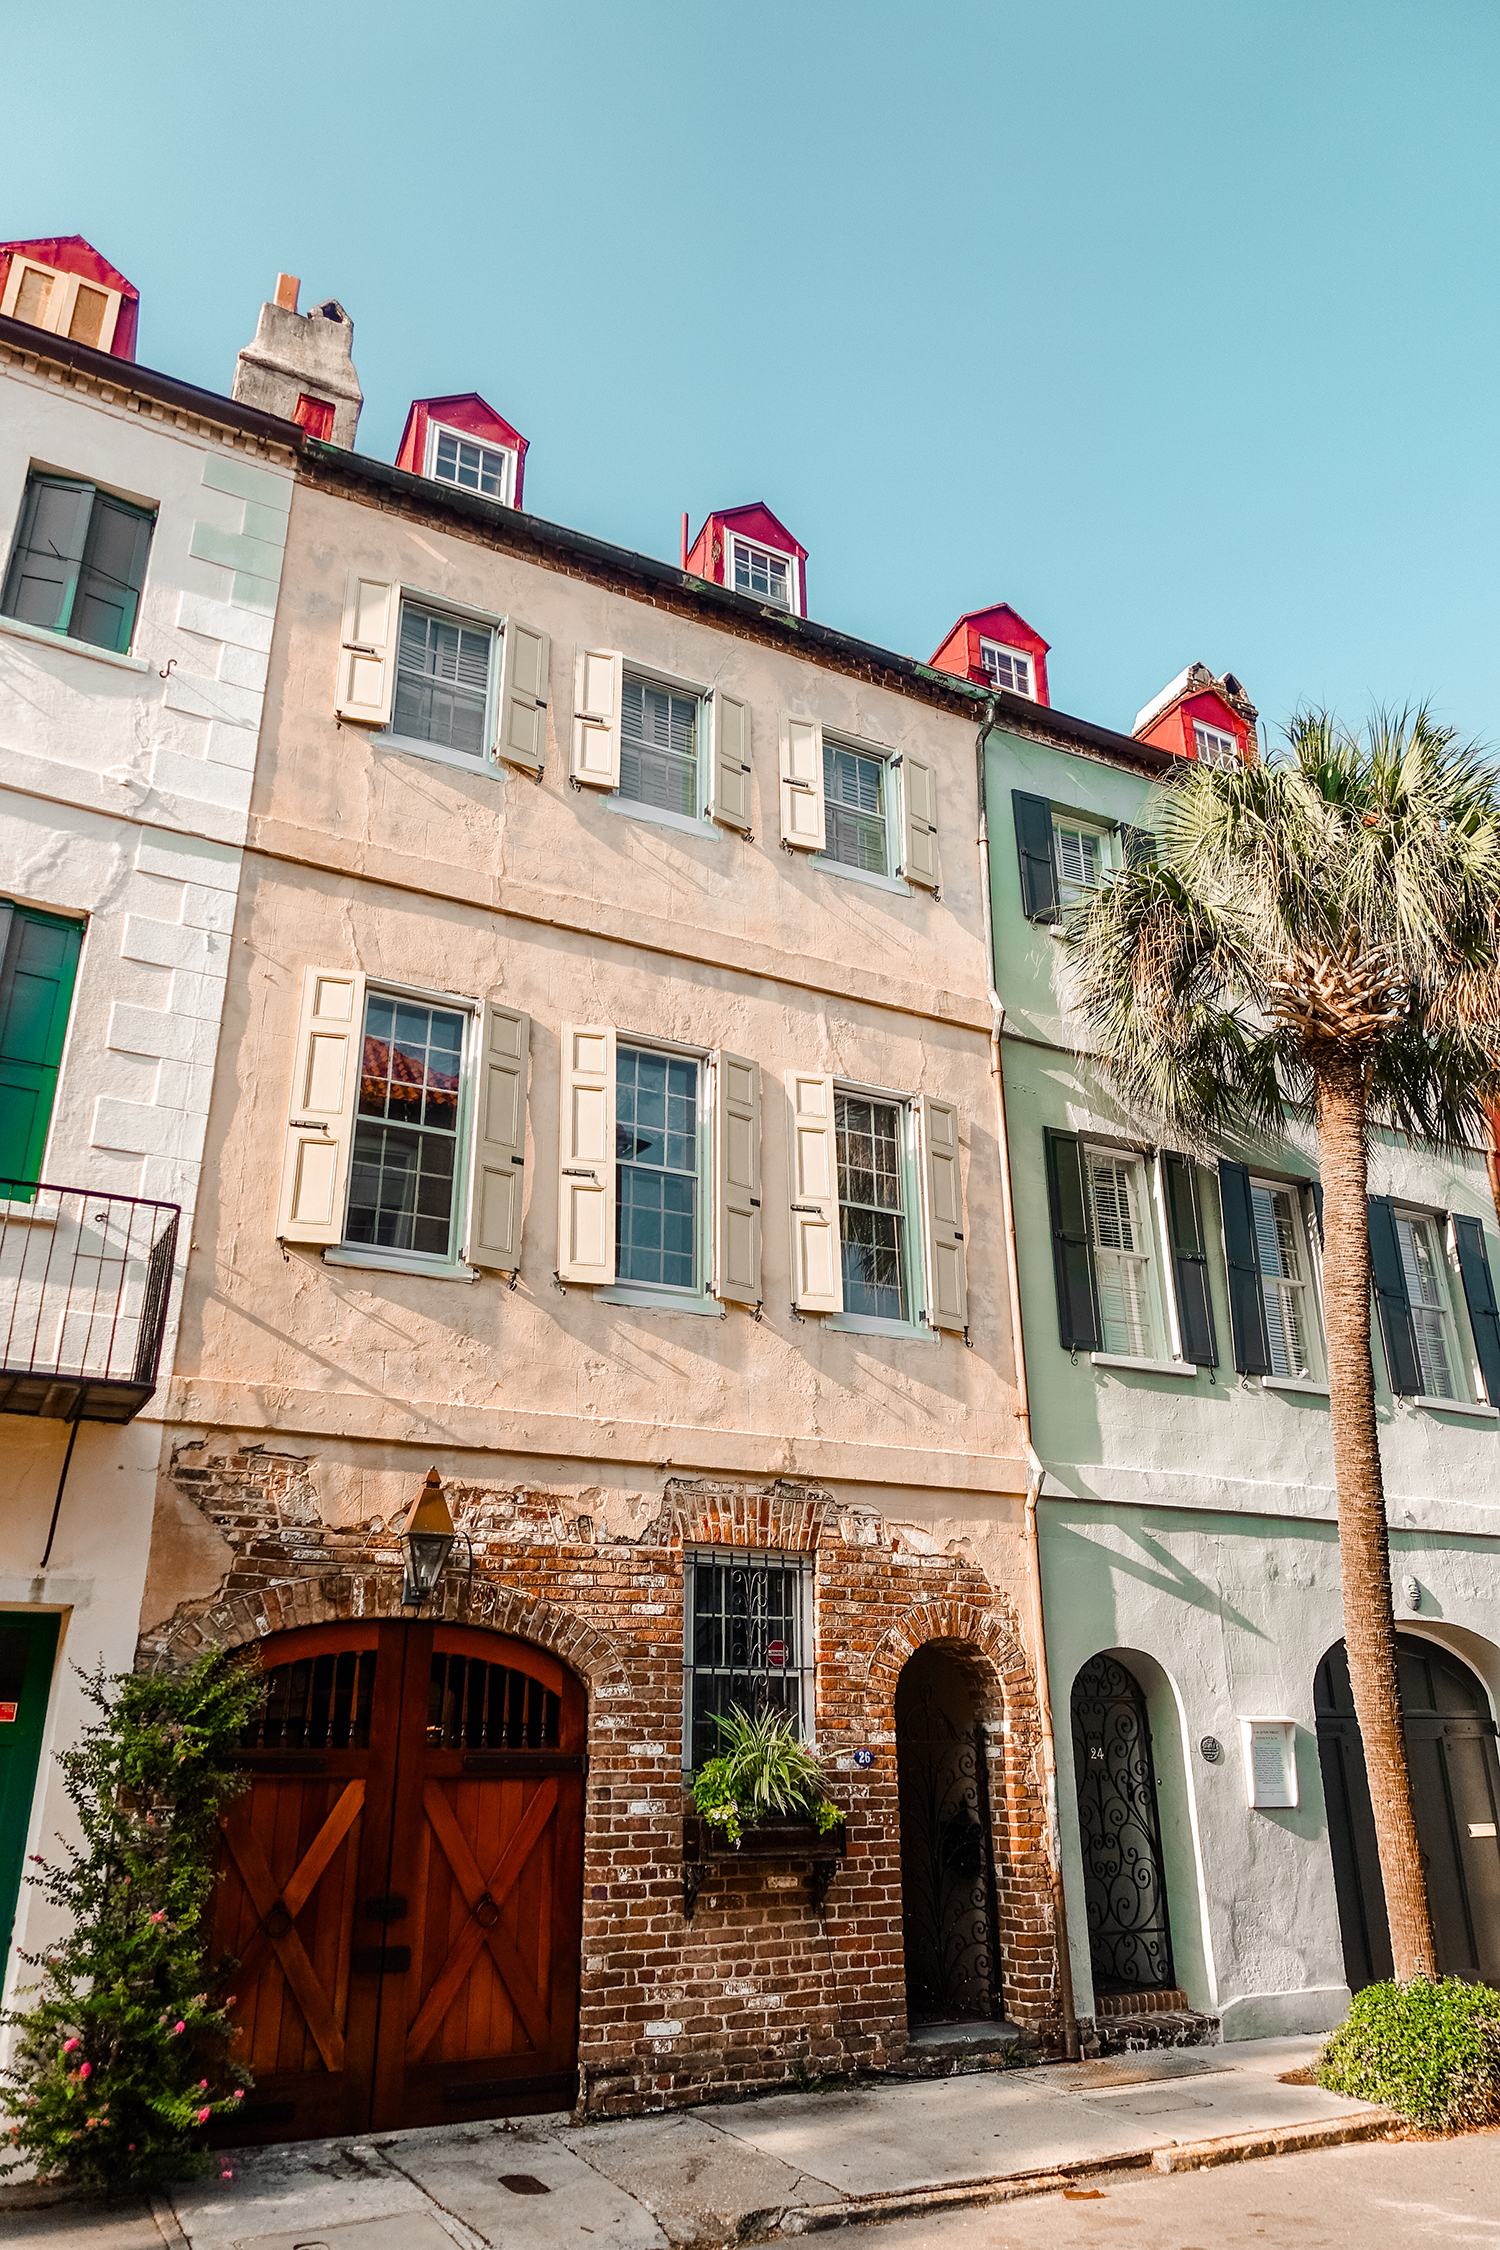 Alyssa Campanella of The A List blog's 48 Hours in Charleston itinerary